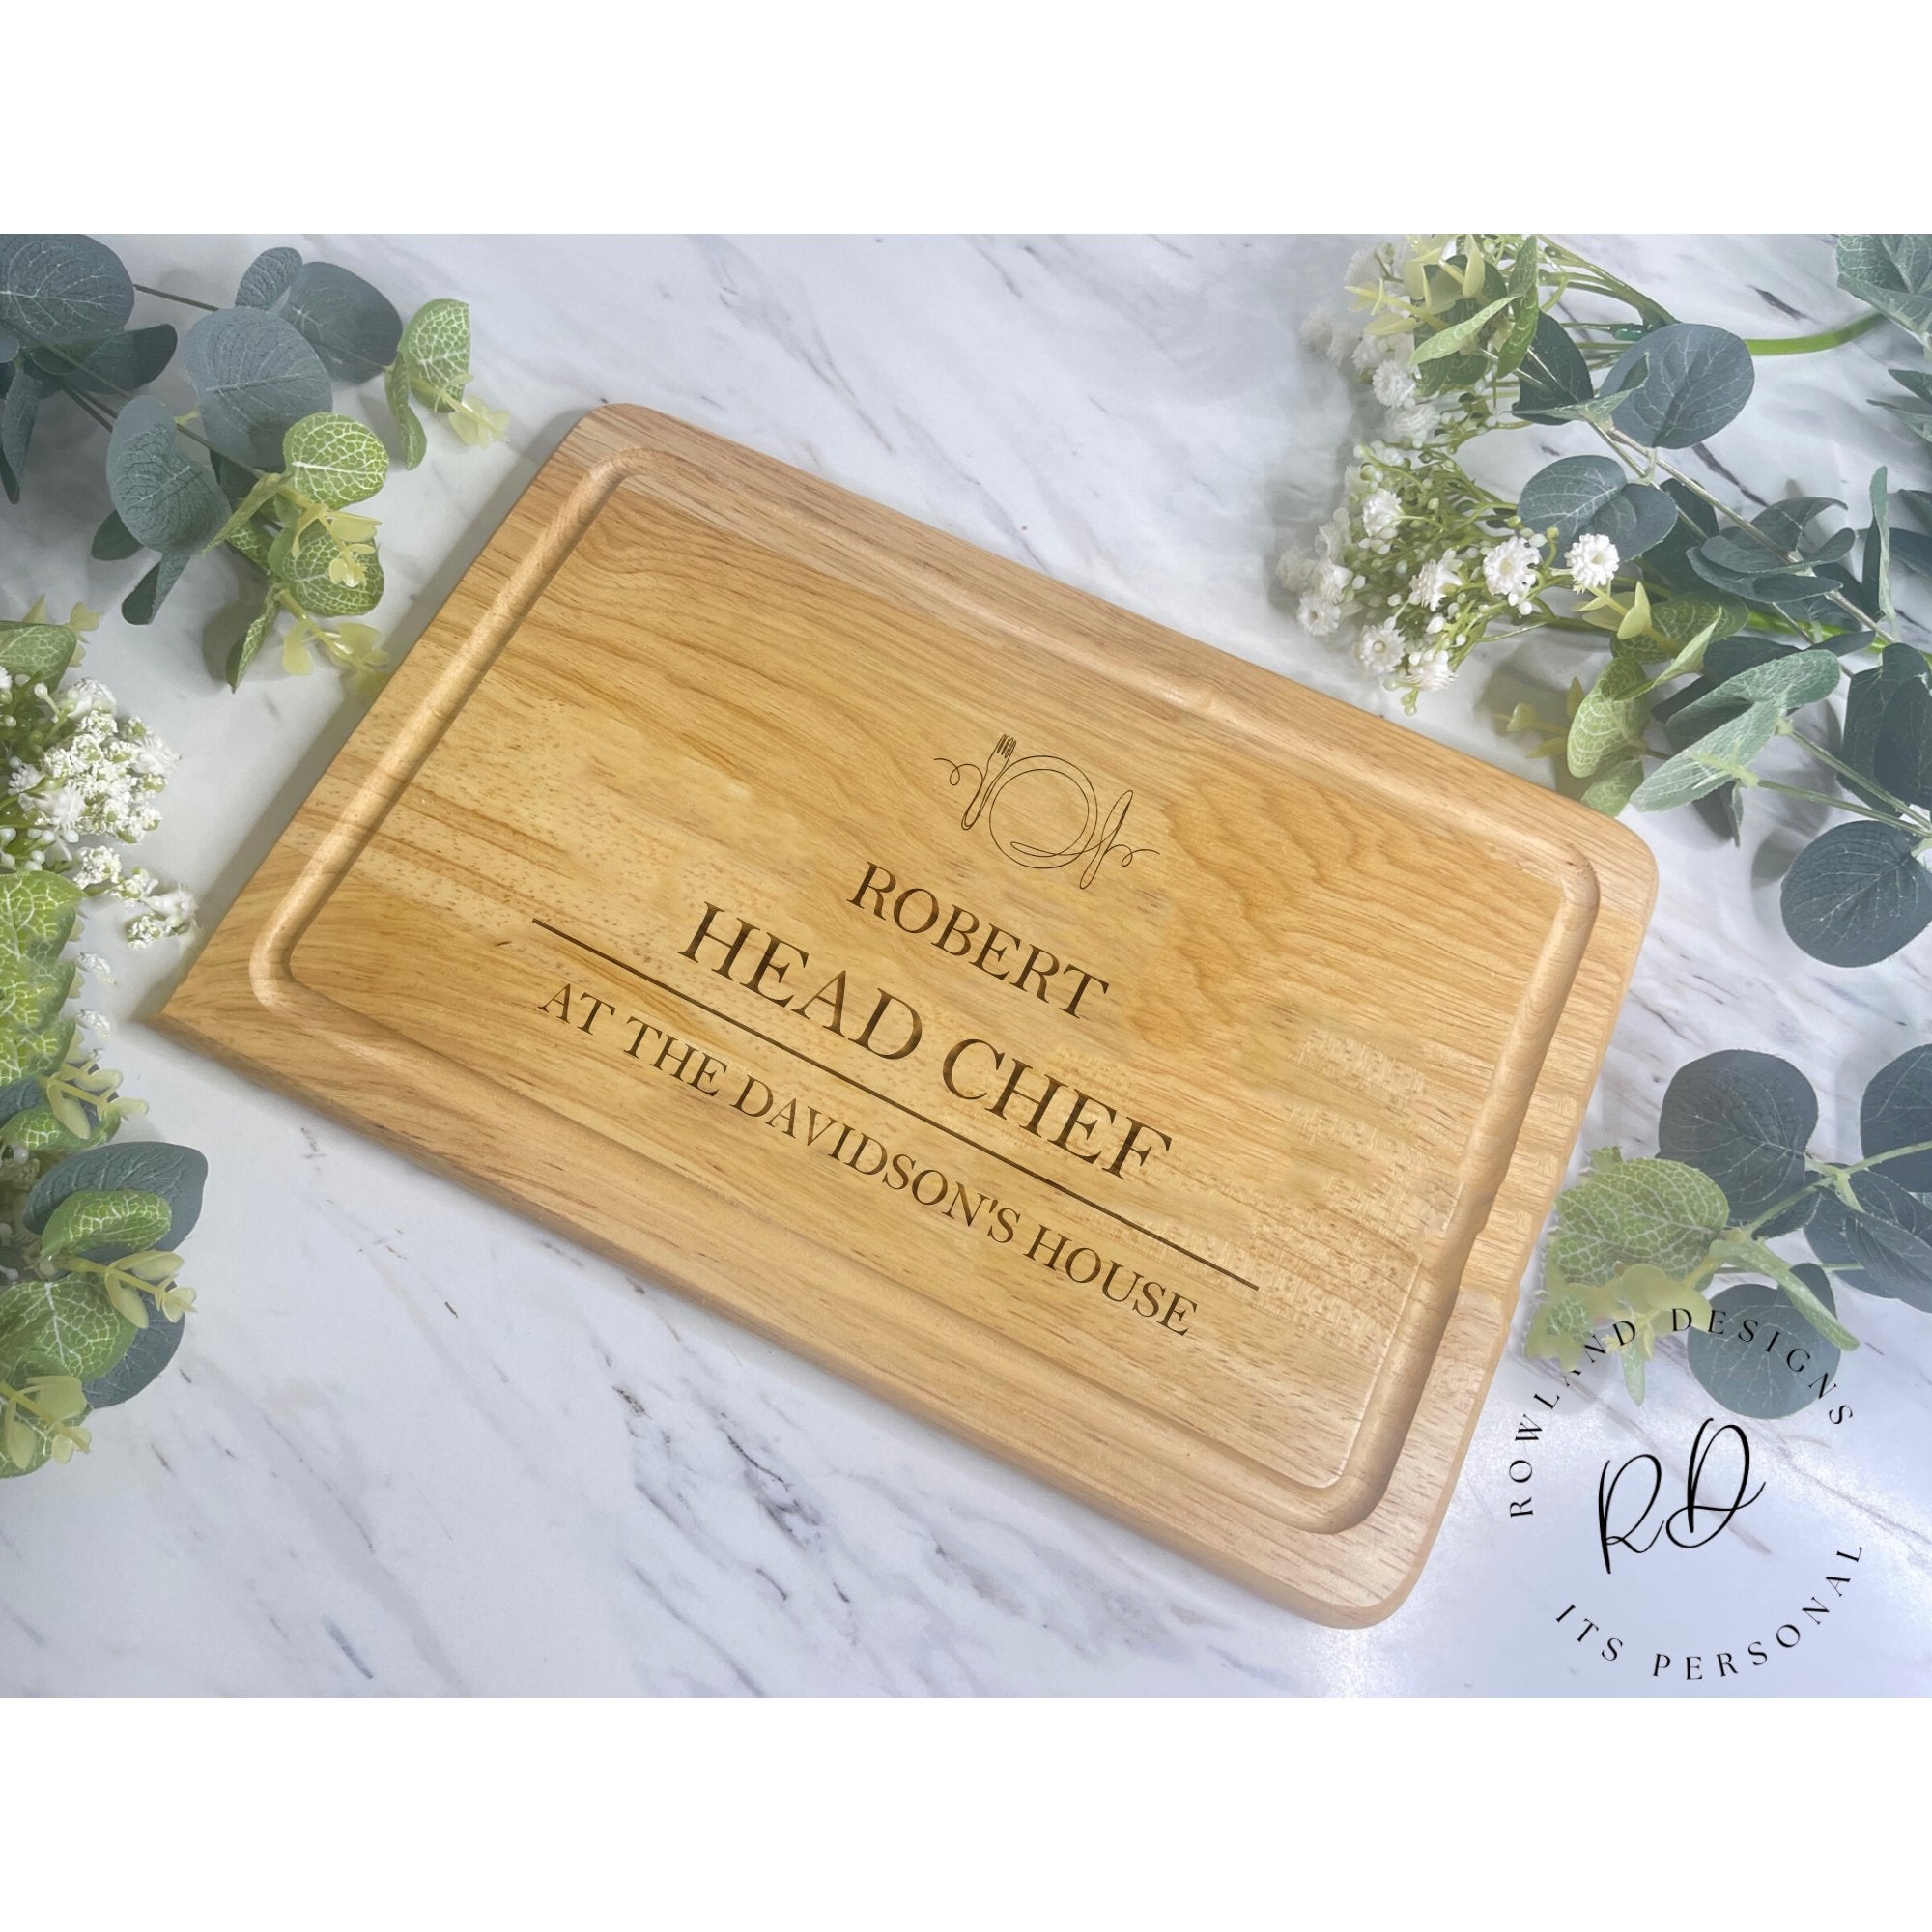 Add warmth to your kitchen or share the love with our Personalised Chopping Board - Knife & Fork Design. Laser-engraved on Beech Wood, personalize yours today for a unique touch. All text in caps. Order now to elevate your celebrations with the magic of personalisation. Measures 300mm x 200mm. Hand wash only, not dishwasher safe. 📦❤️